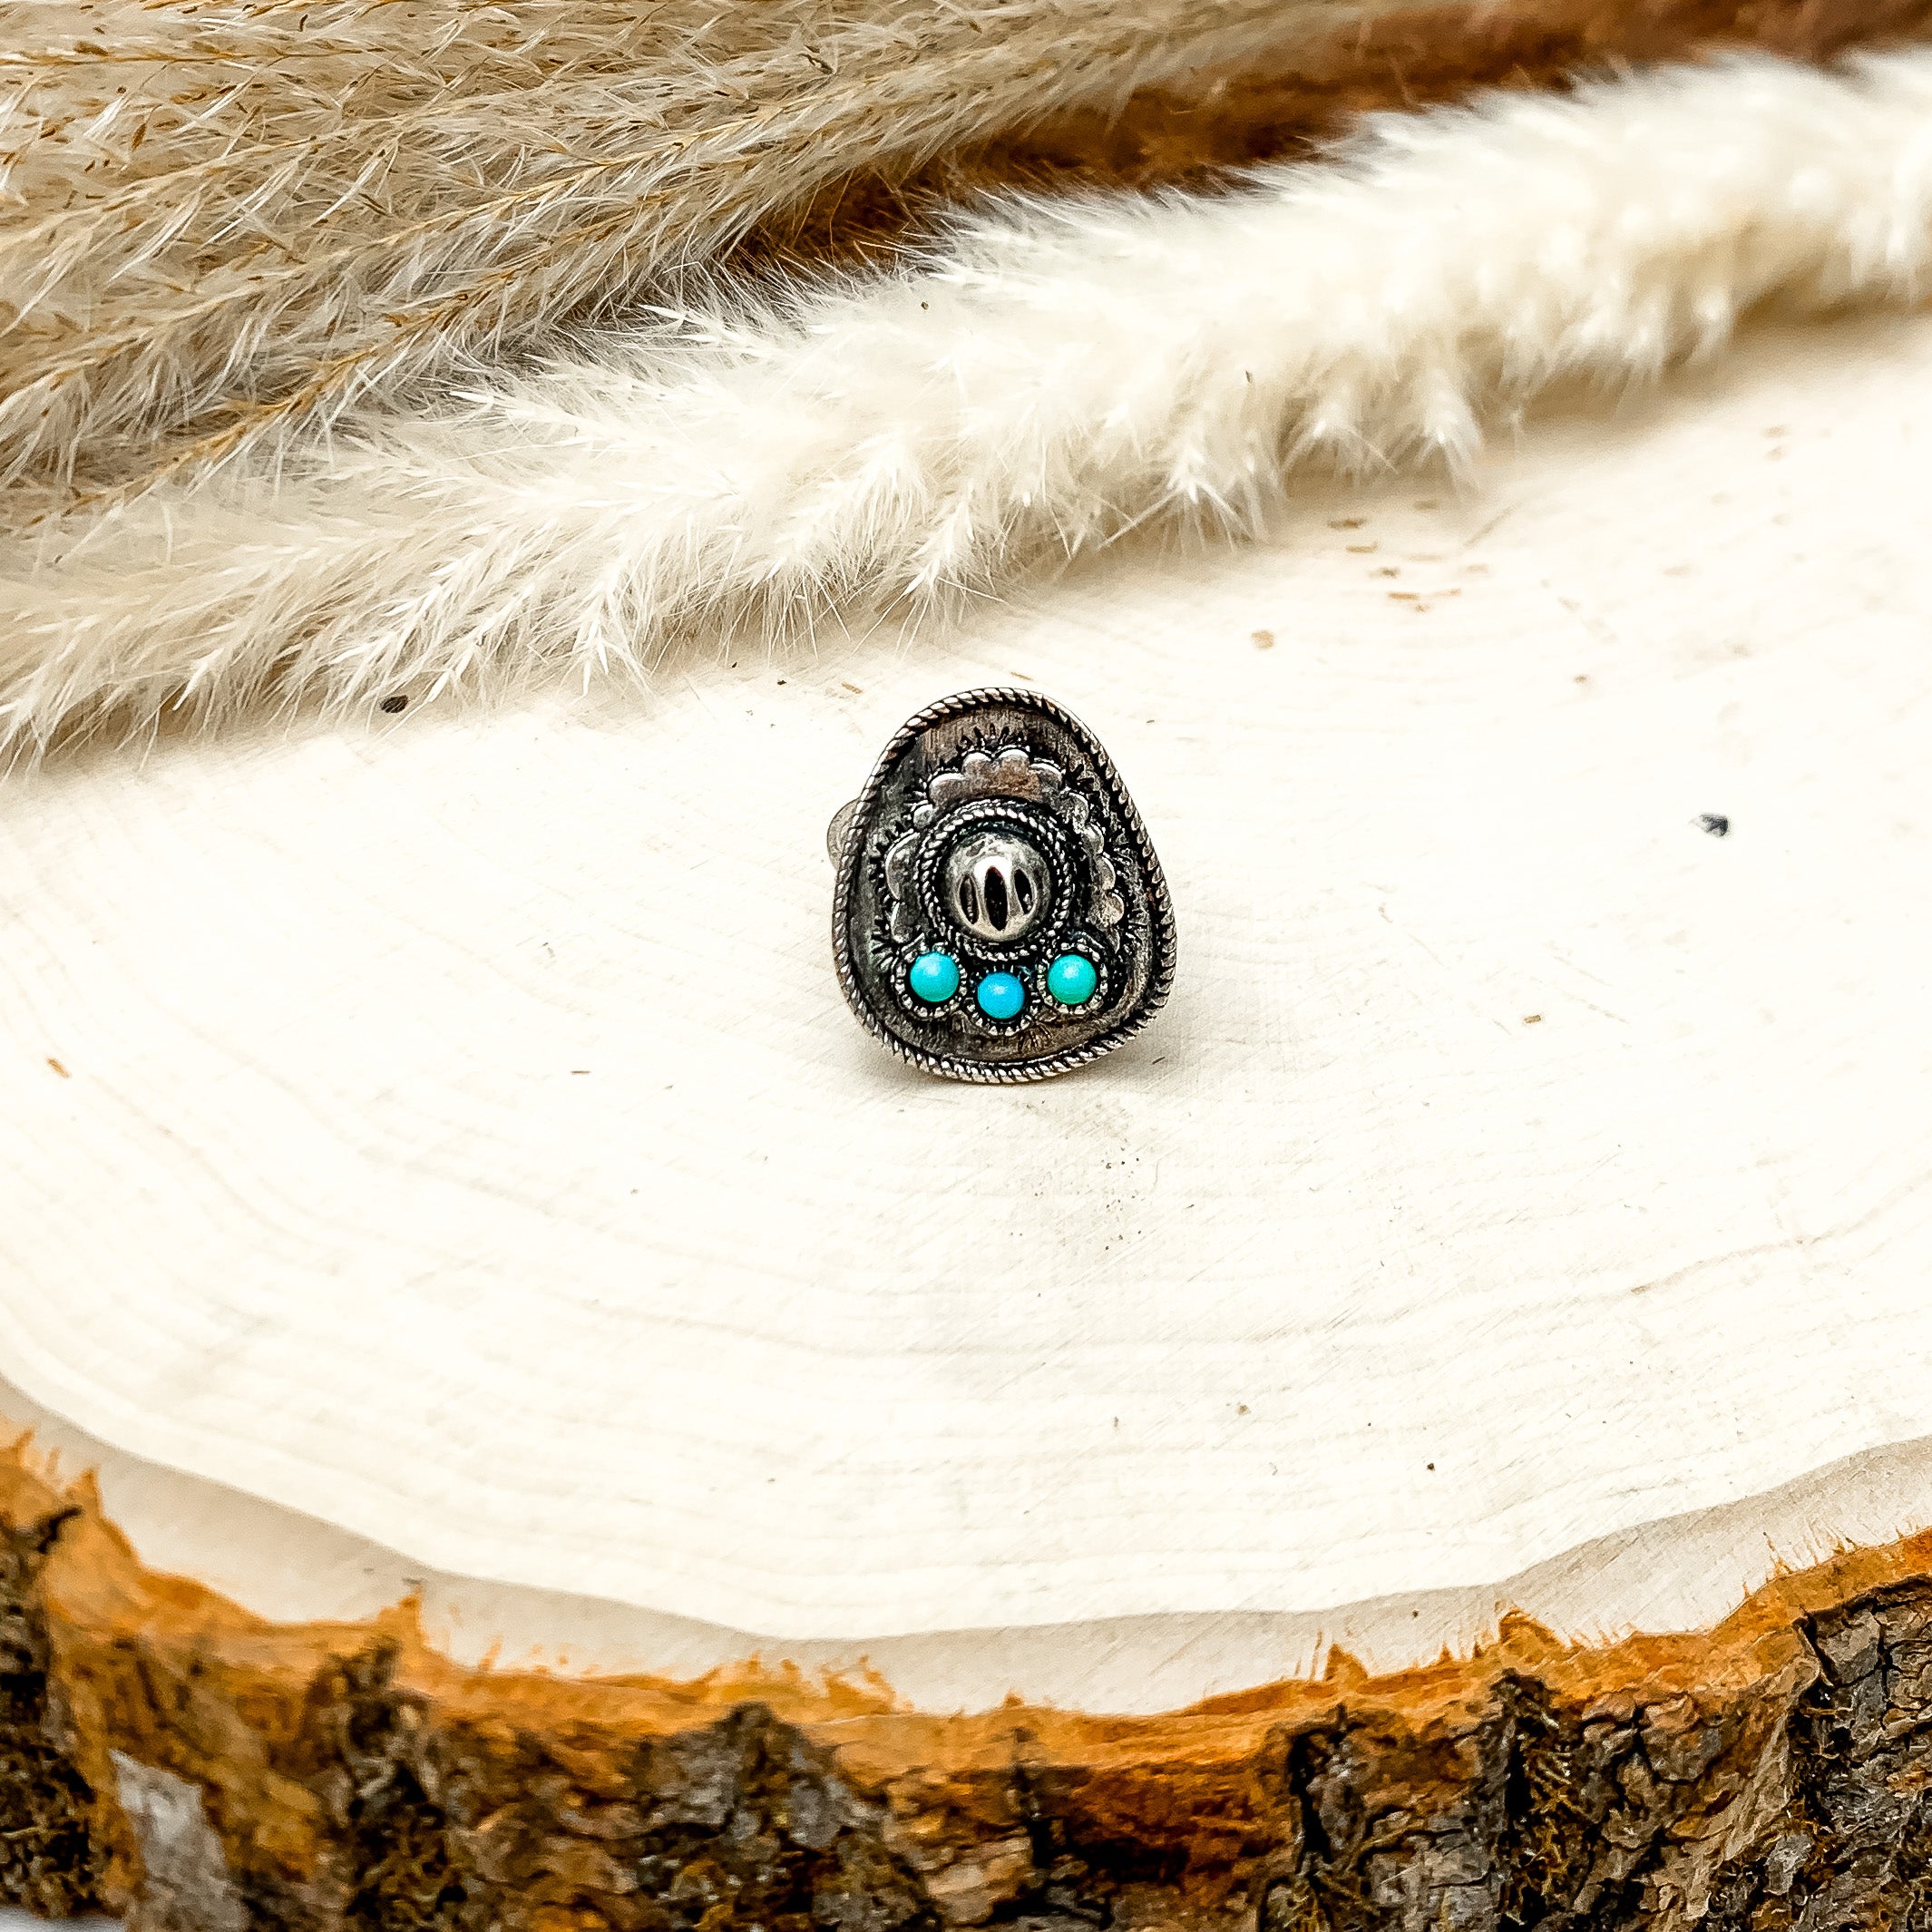 Cowgirl Silver Tone Ring With Turquoise Blue Stones. Silver cowboy hat ring sitting on a wood piece with feathers in the back.